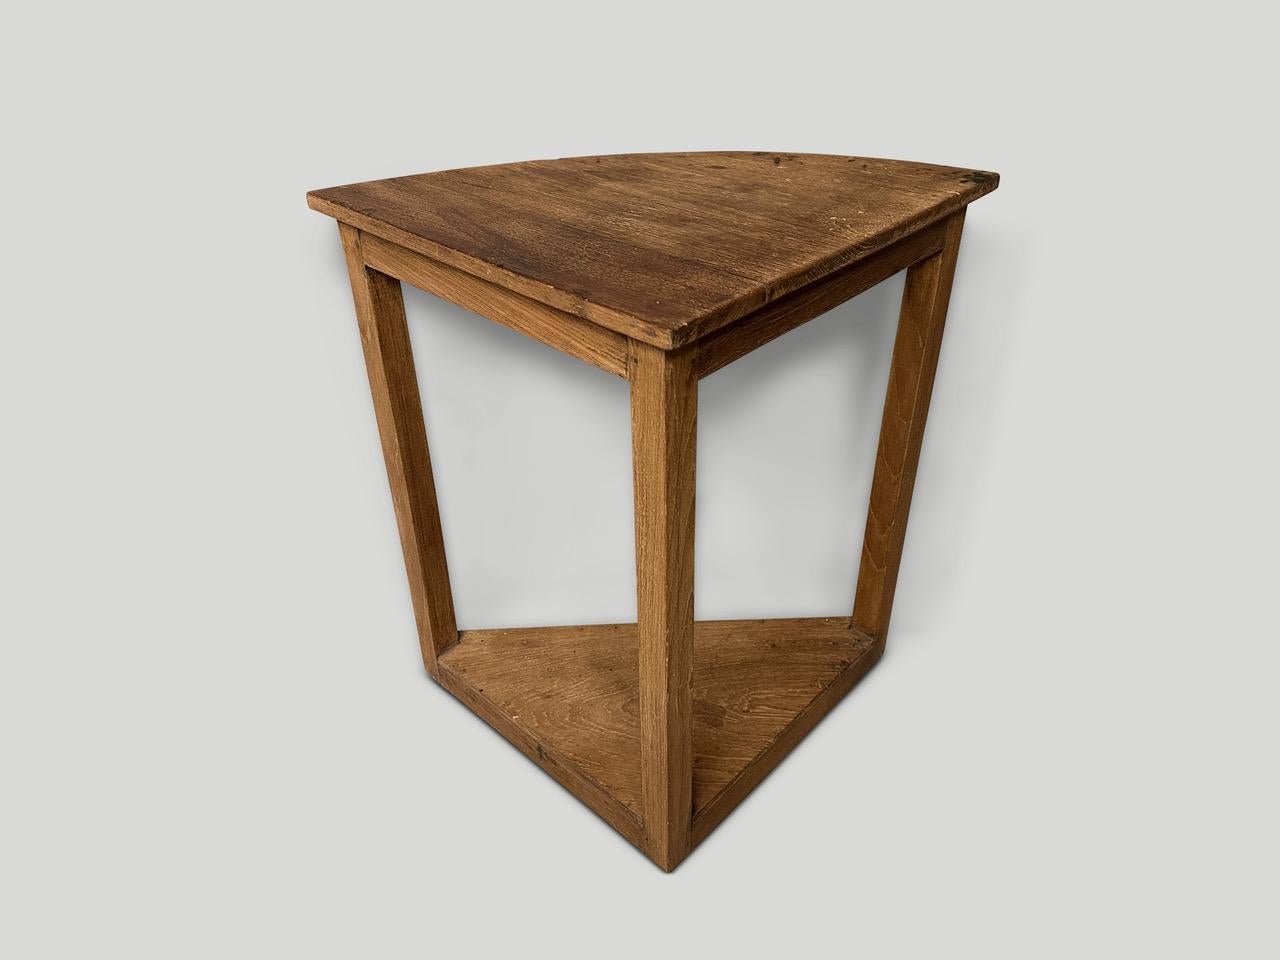 Andrianna Shamaris Antique Teak Wood Corner Table In Excellent Condition For Sale In New York, NY